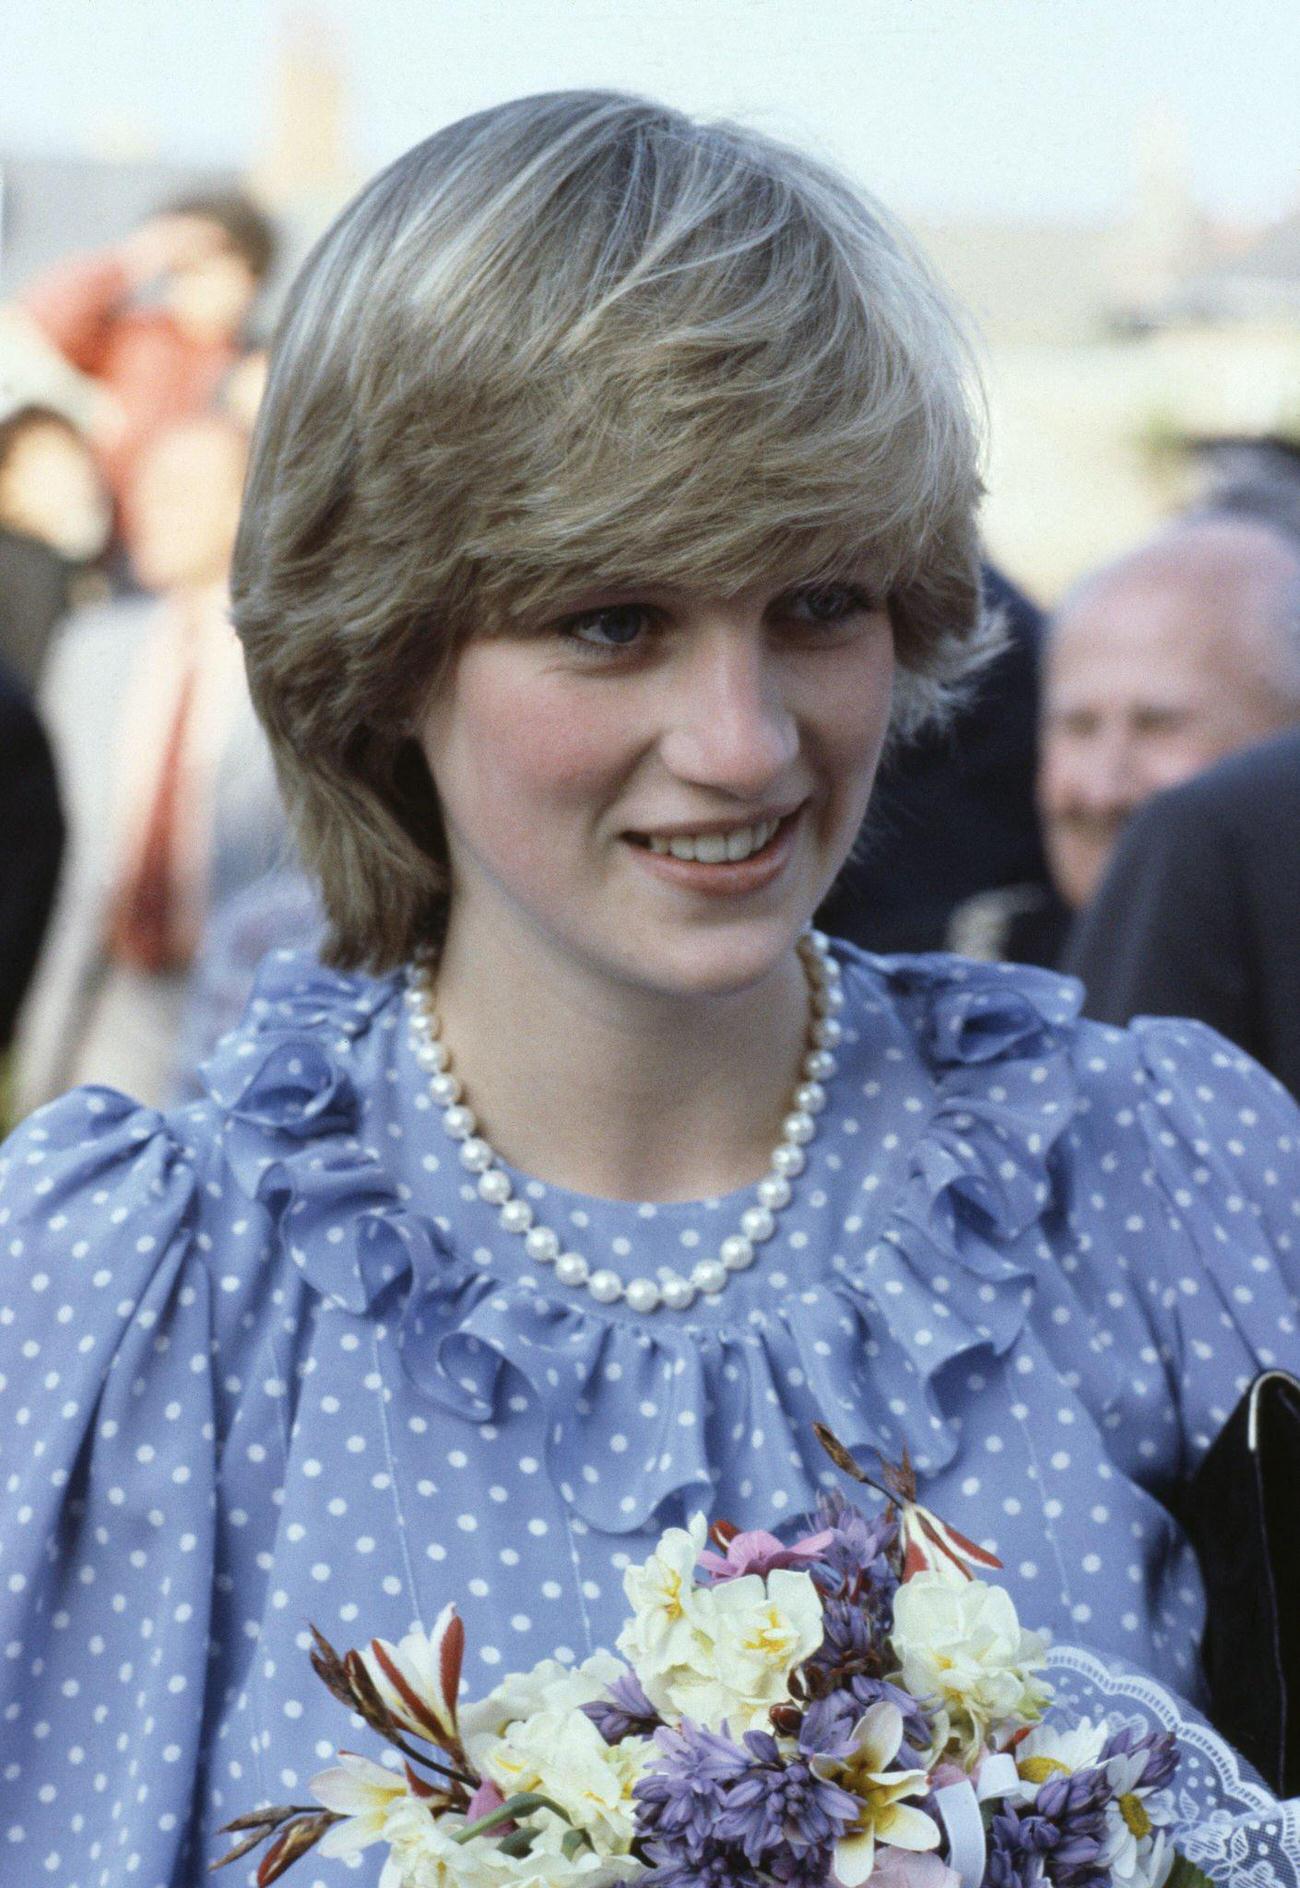 Princess Diana holding a bouquet of flowers, 1981